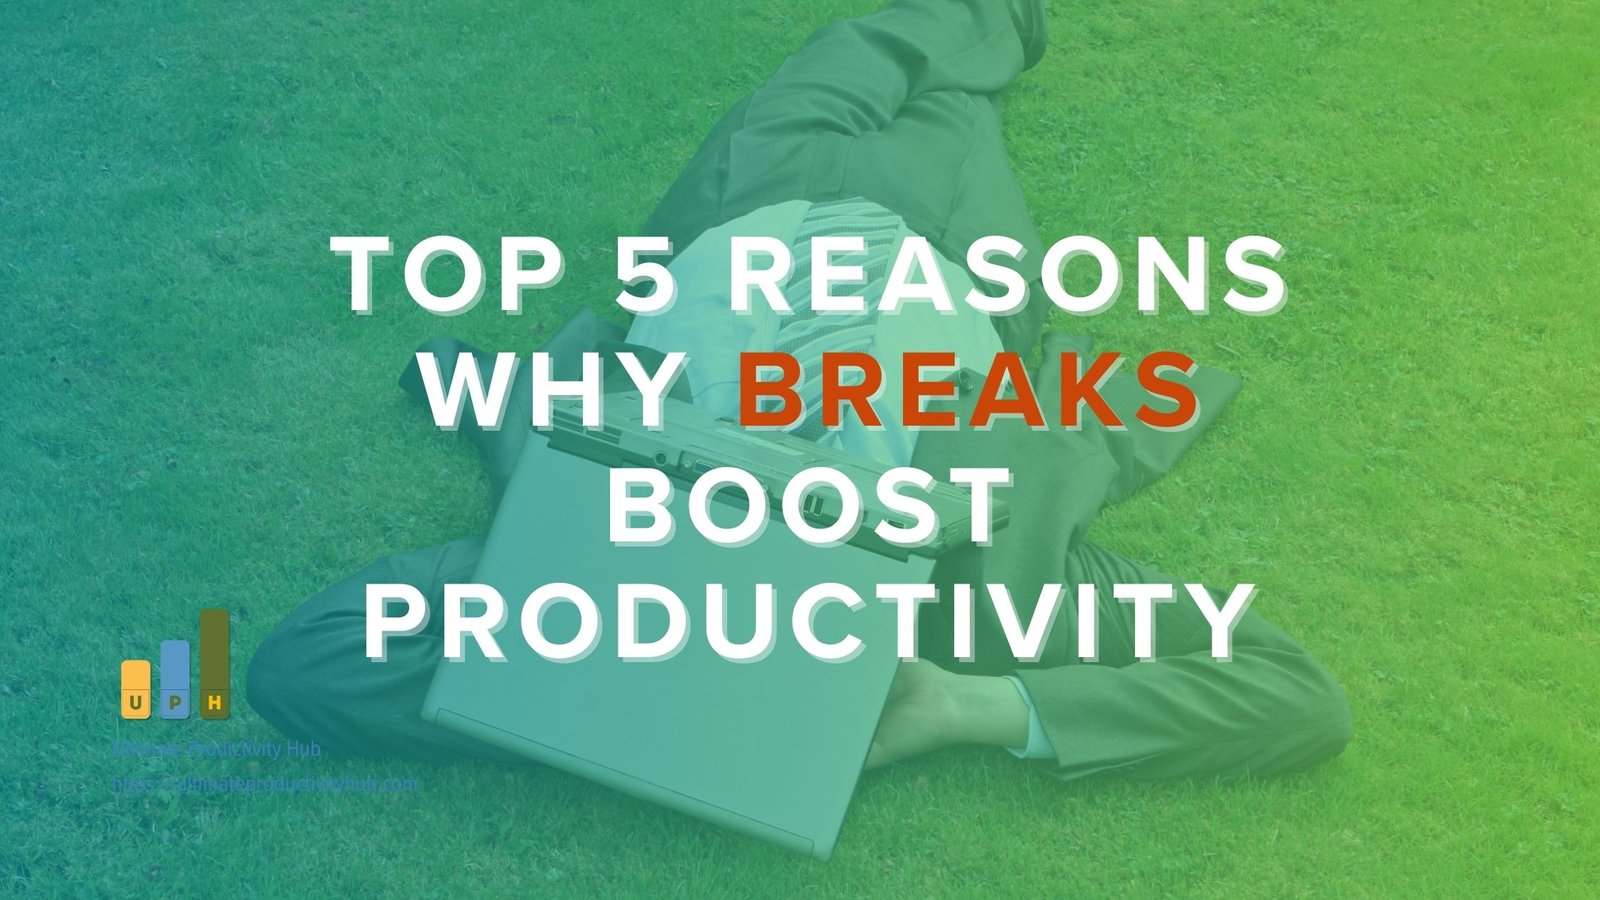 Top 5 Reasons Why Breaks Boost Productivity